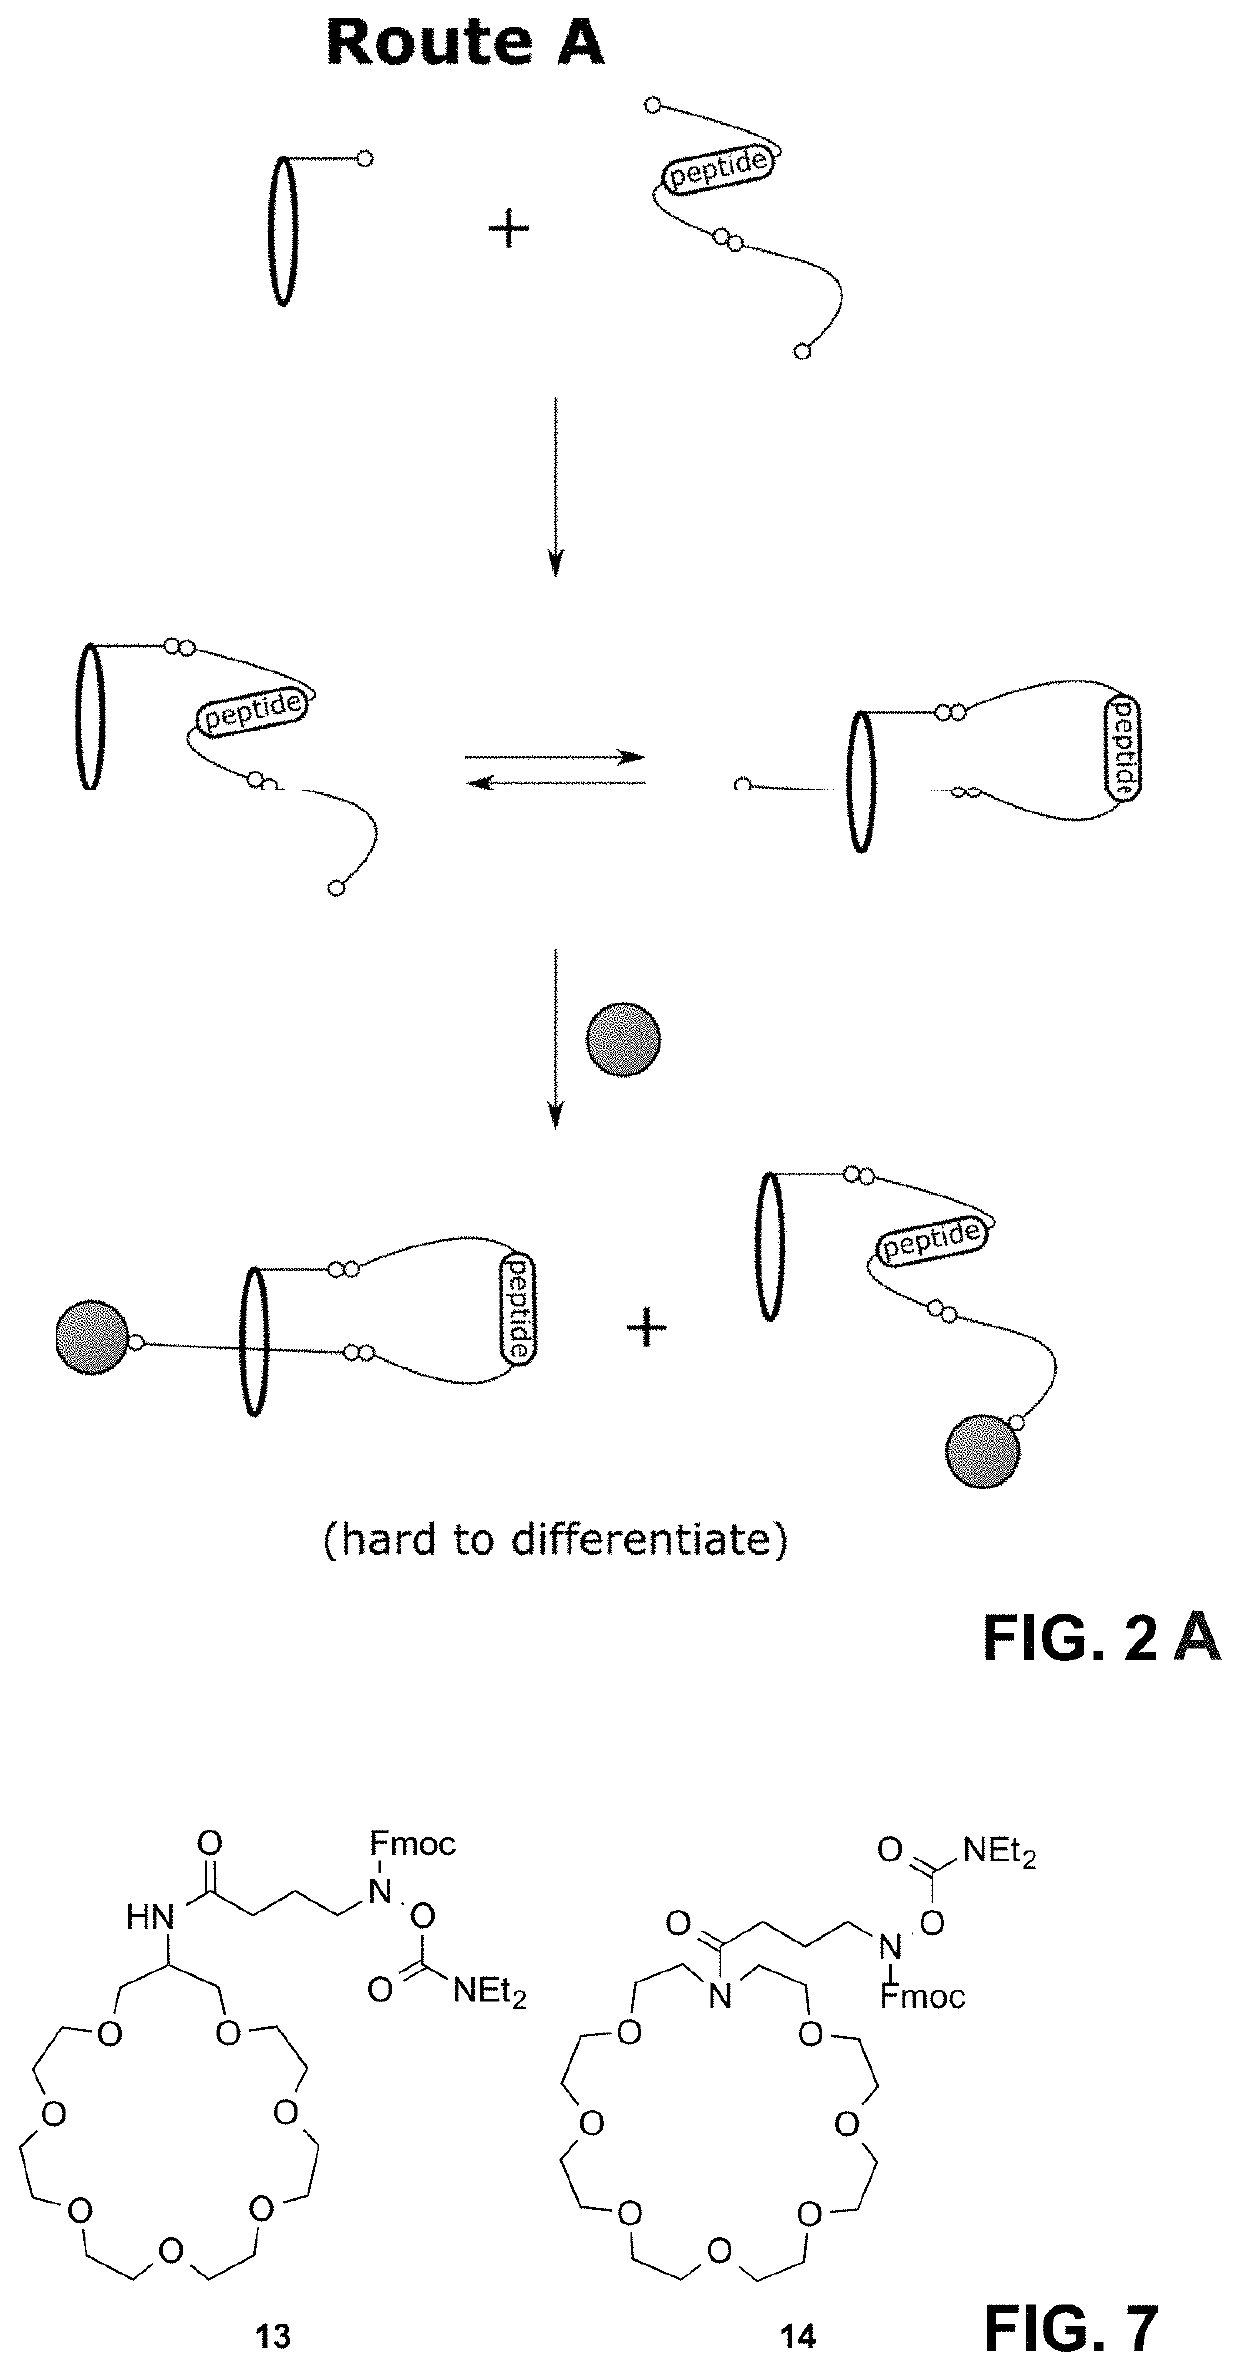 Lasso structures and their synthesis